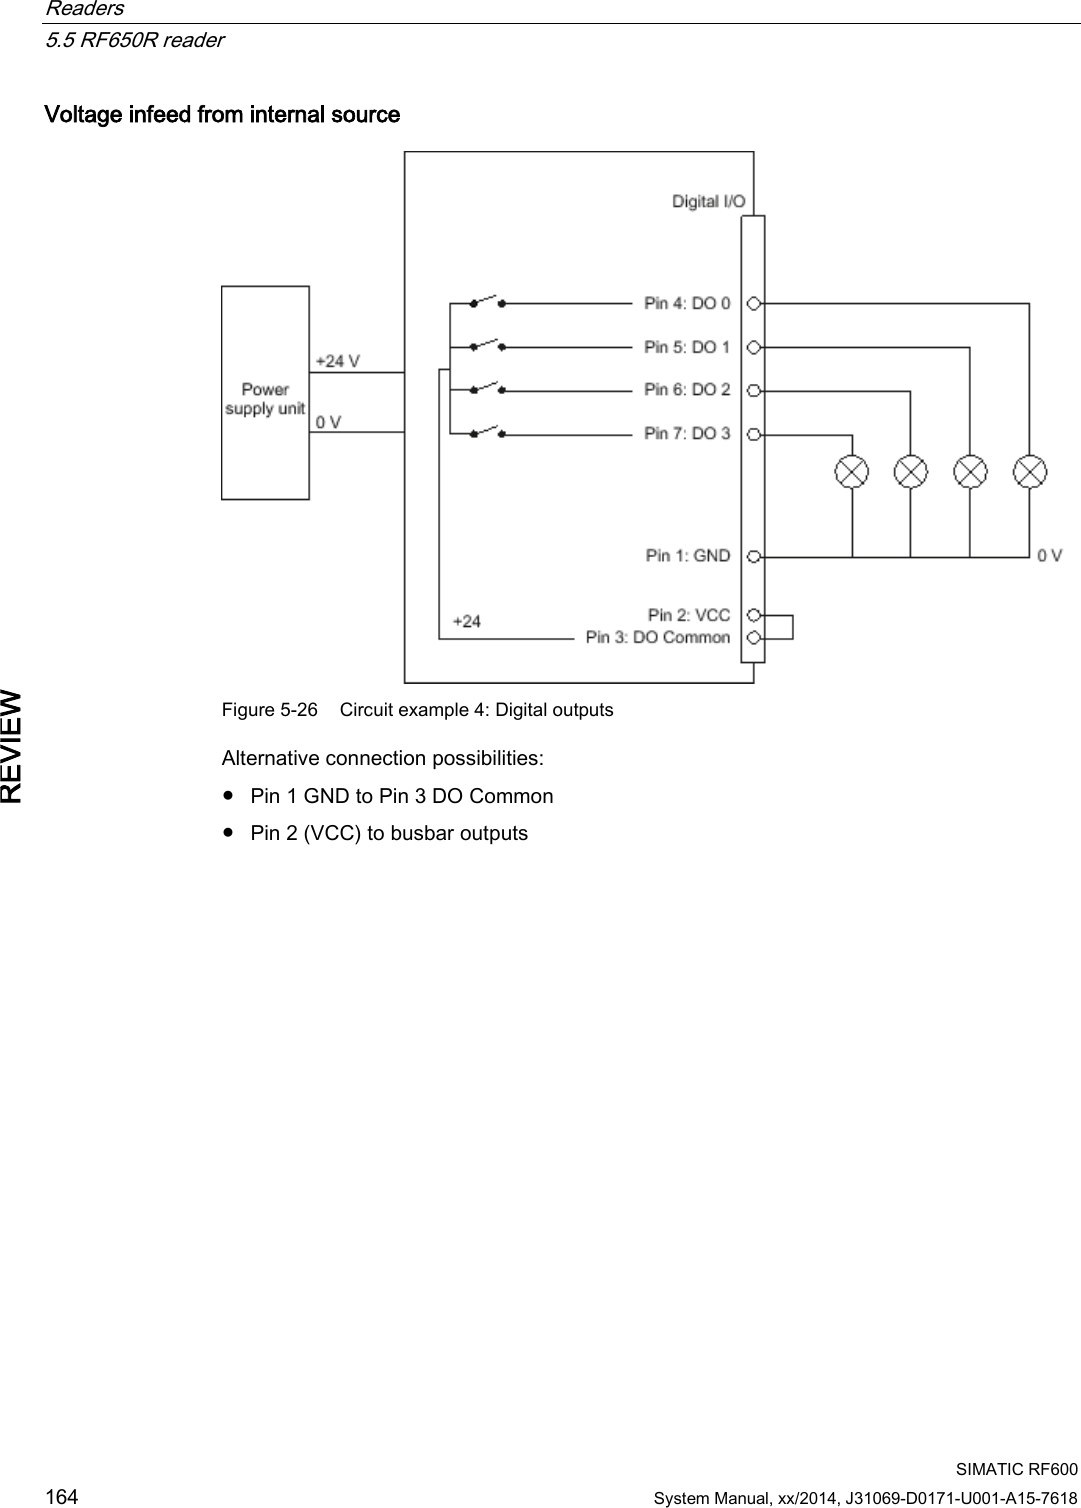 Readers   5.5 RF650R reader  SIMATIC RF600 164 System Manual, xx/2014, J31069-D0171-U001-A15-7618 REVIEW Voltage infeed from internal source  Figure 5-26 Circuit example 4: Digital outputs Alternative connection possibilities: ● Pin 1 GND to Pin 3 DO Common ● Pin 2 (VCC) to busbar outputs 